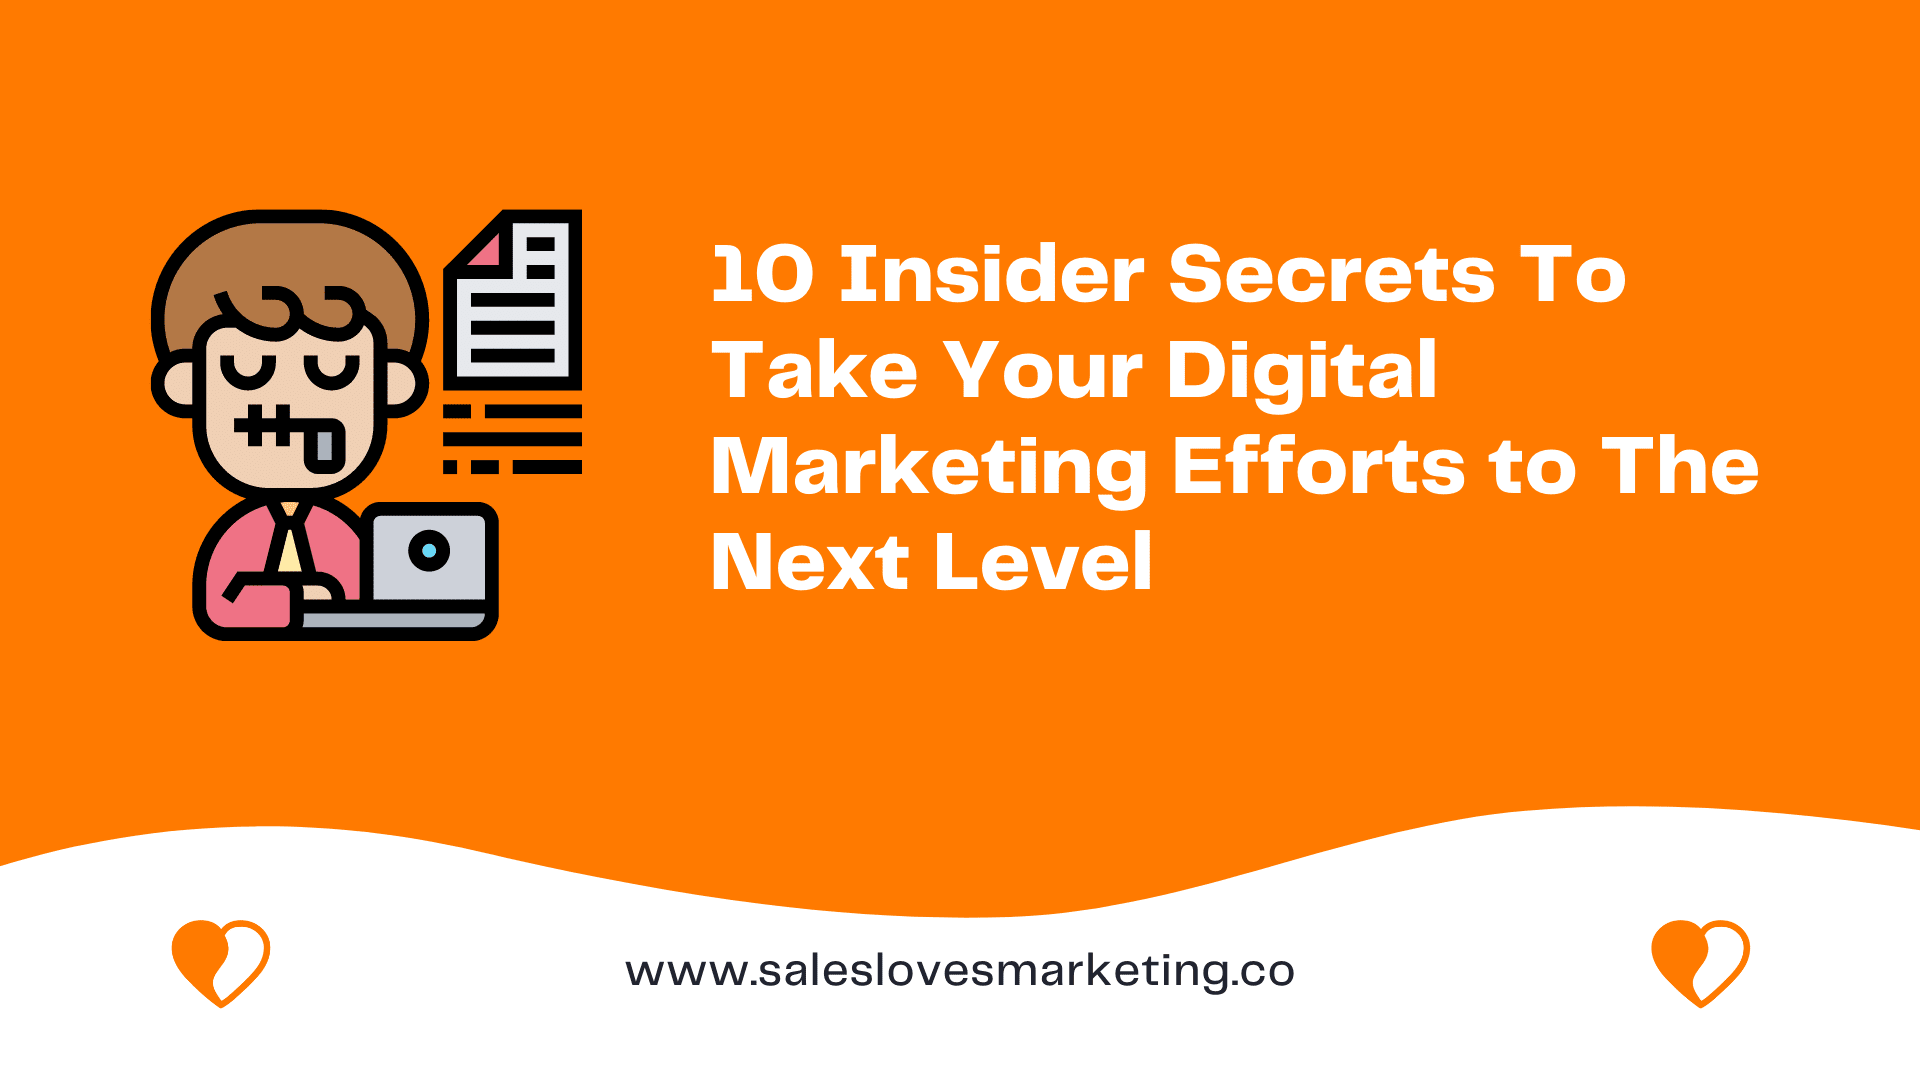 10 Insider Secrets To Take Your Digital Marketing Efforts to The Next Level 